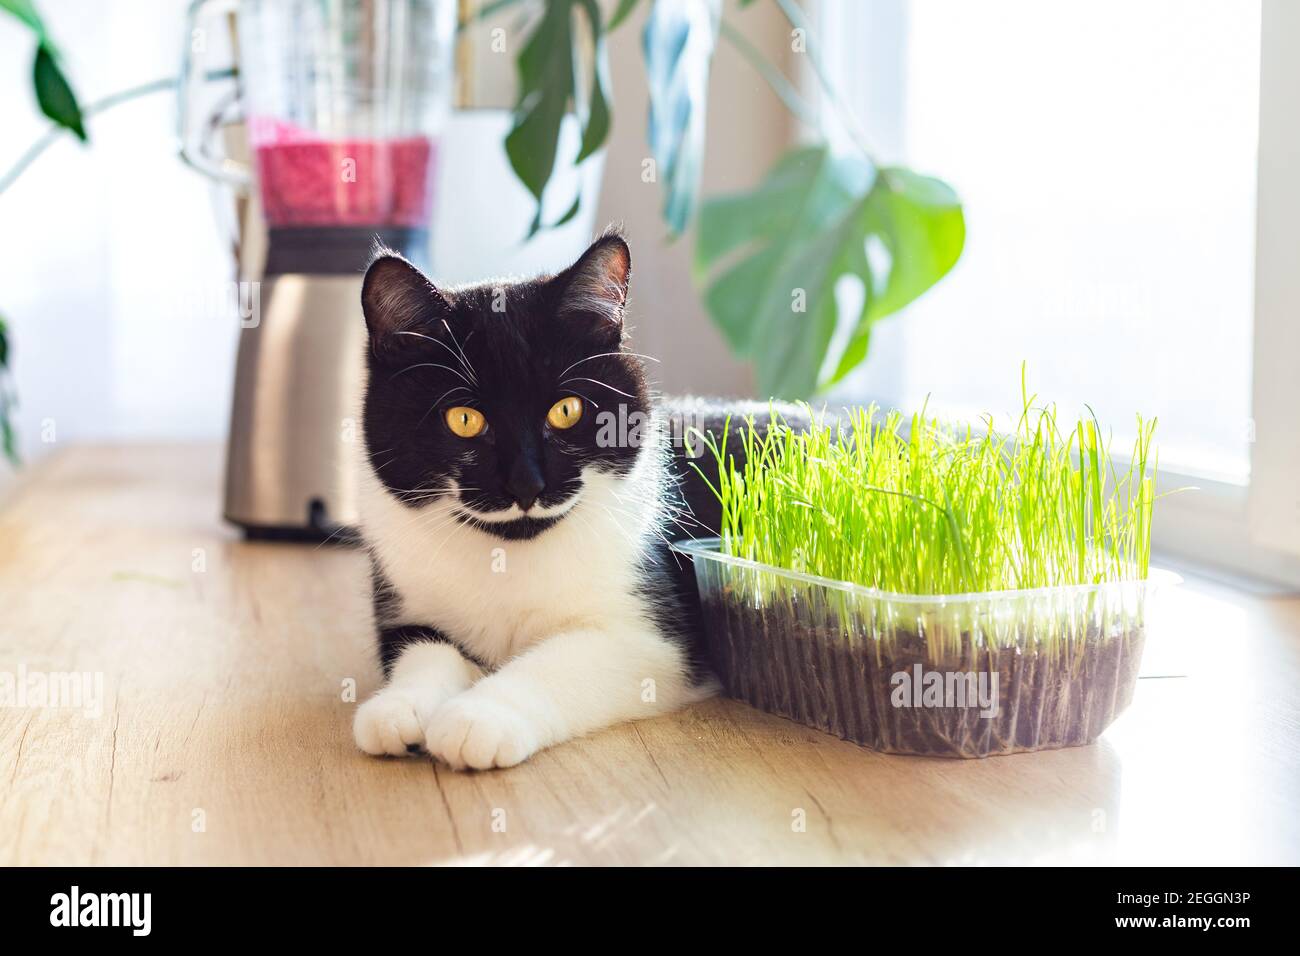 A black and white cat with yellow eyes lies on a kitchen window. Grass for cats. Stock Photo